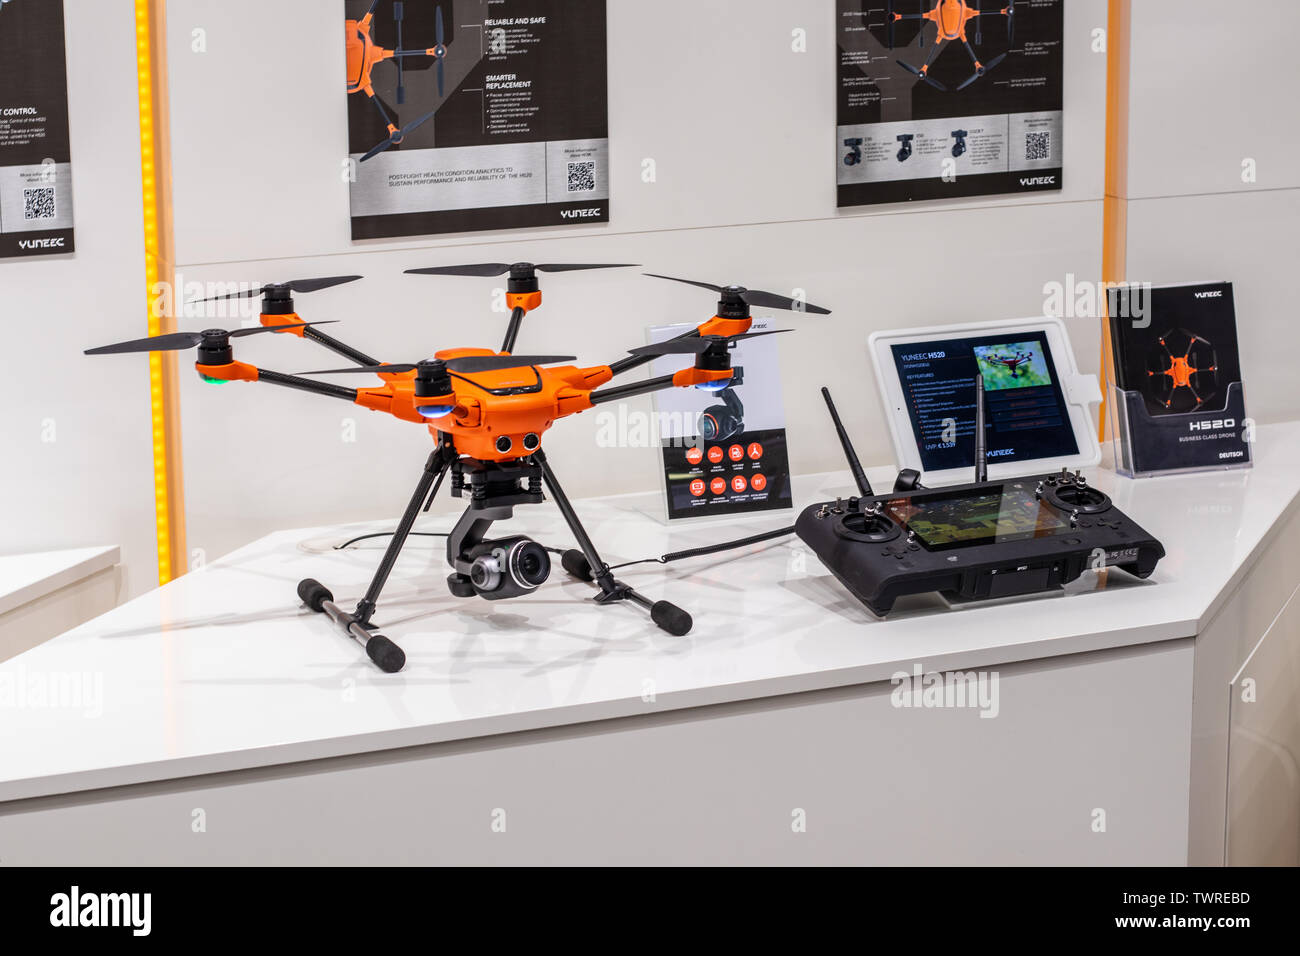 Berlin, Germany, Aug 30, 2018 Yuneec H520 E90 4k Camera Drone unmanned aerial vehicles UAV, Yuneec exhibition showroom, Global Innovations Show IFA Stock Photo